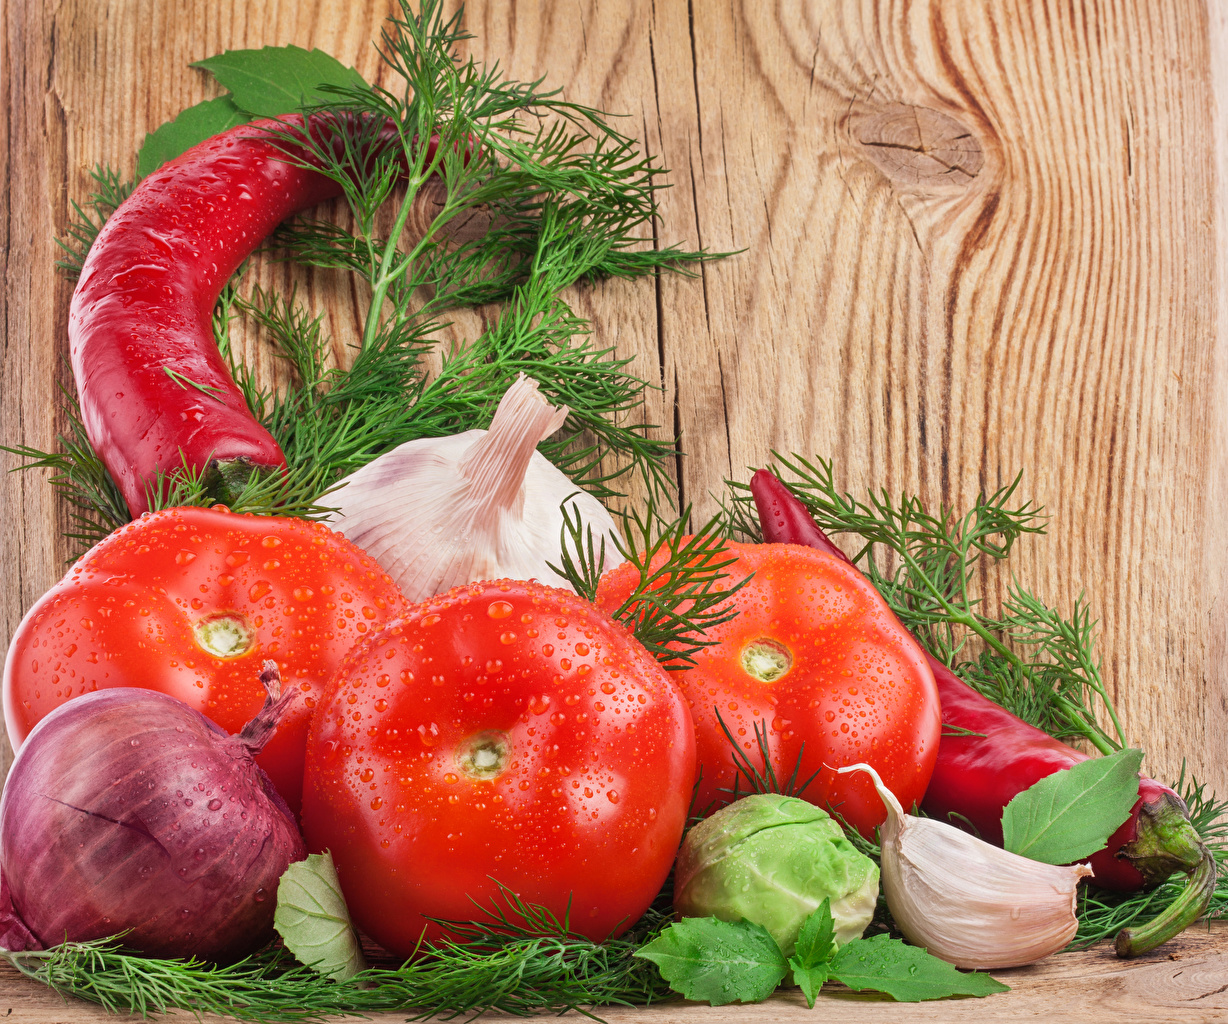 Wallpaper Onion Tomatoes Dill Garlic Food Pepper Vegetables